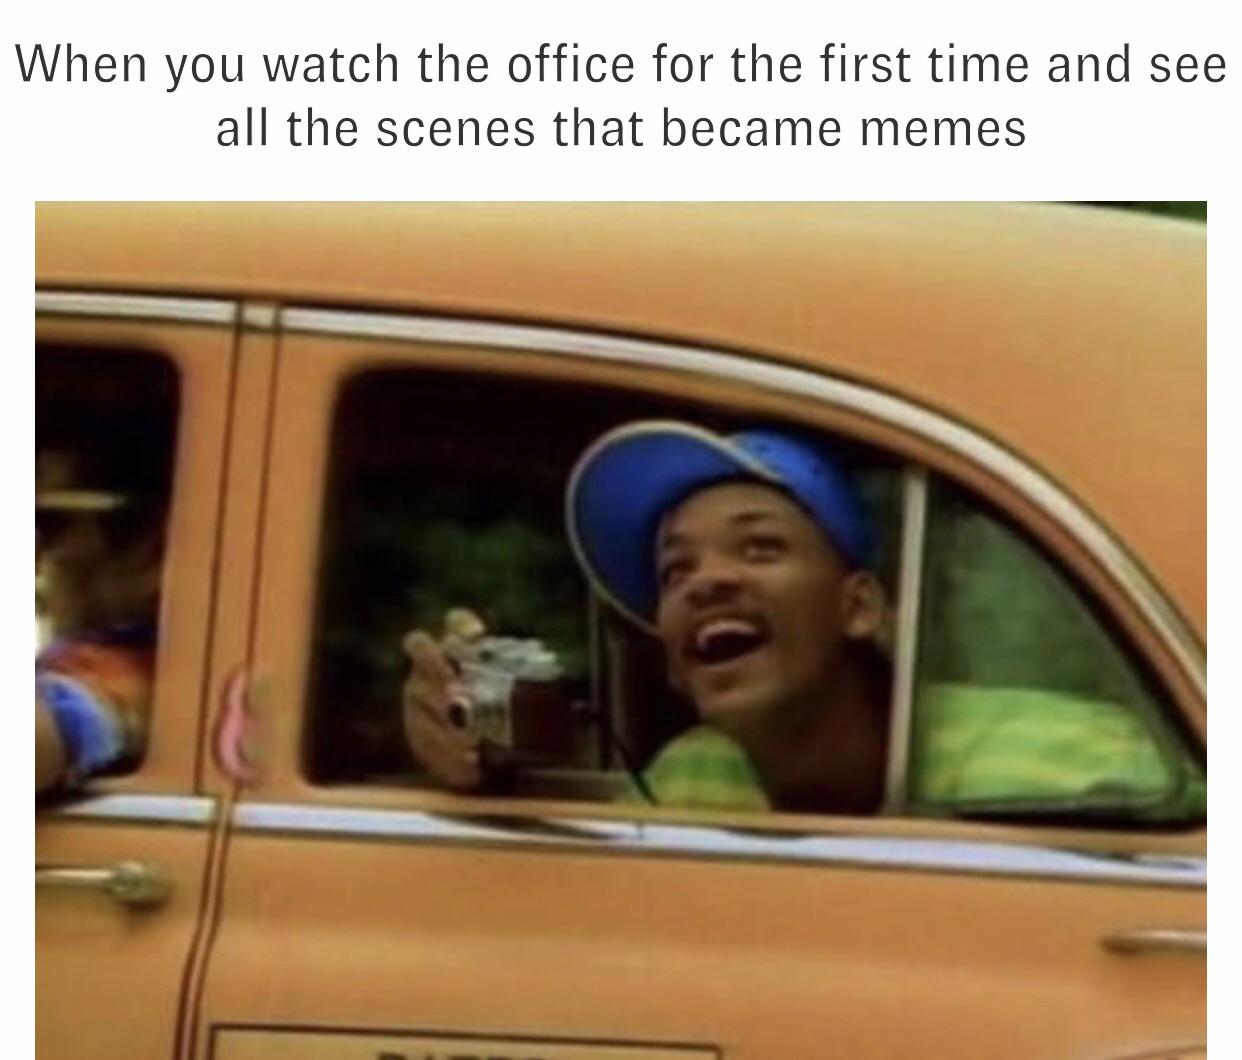 office memes - Meme - When you watch the office for the first time and see all the scenes that became memes